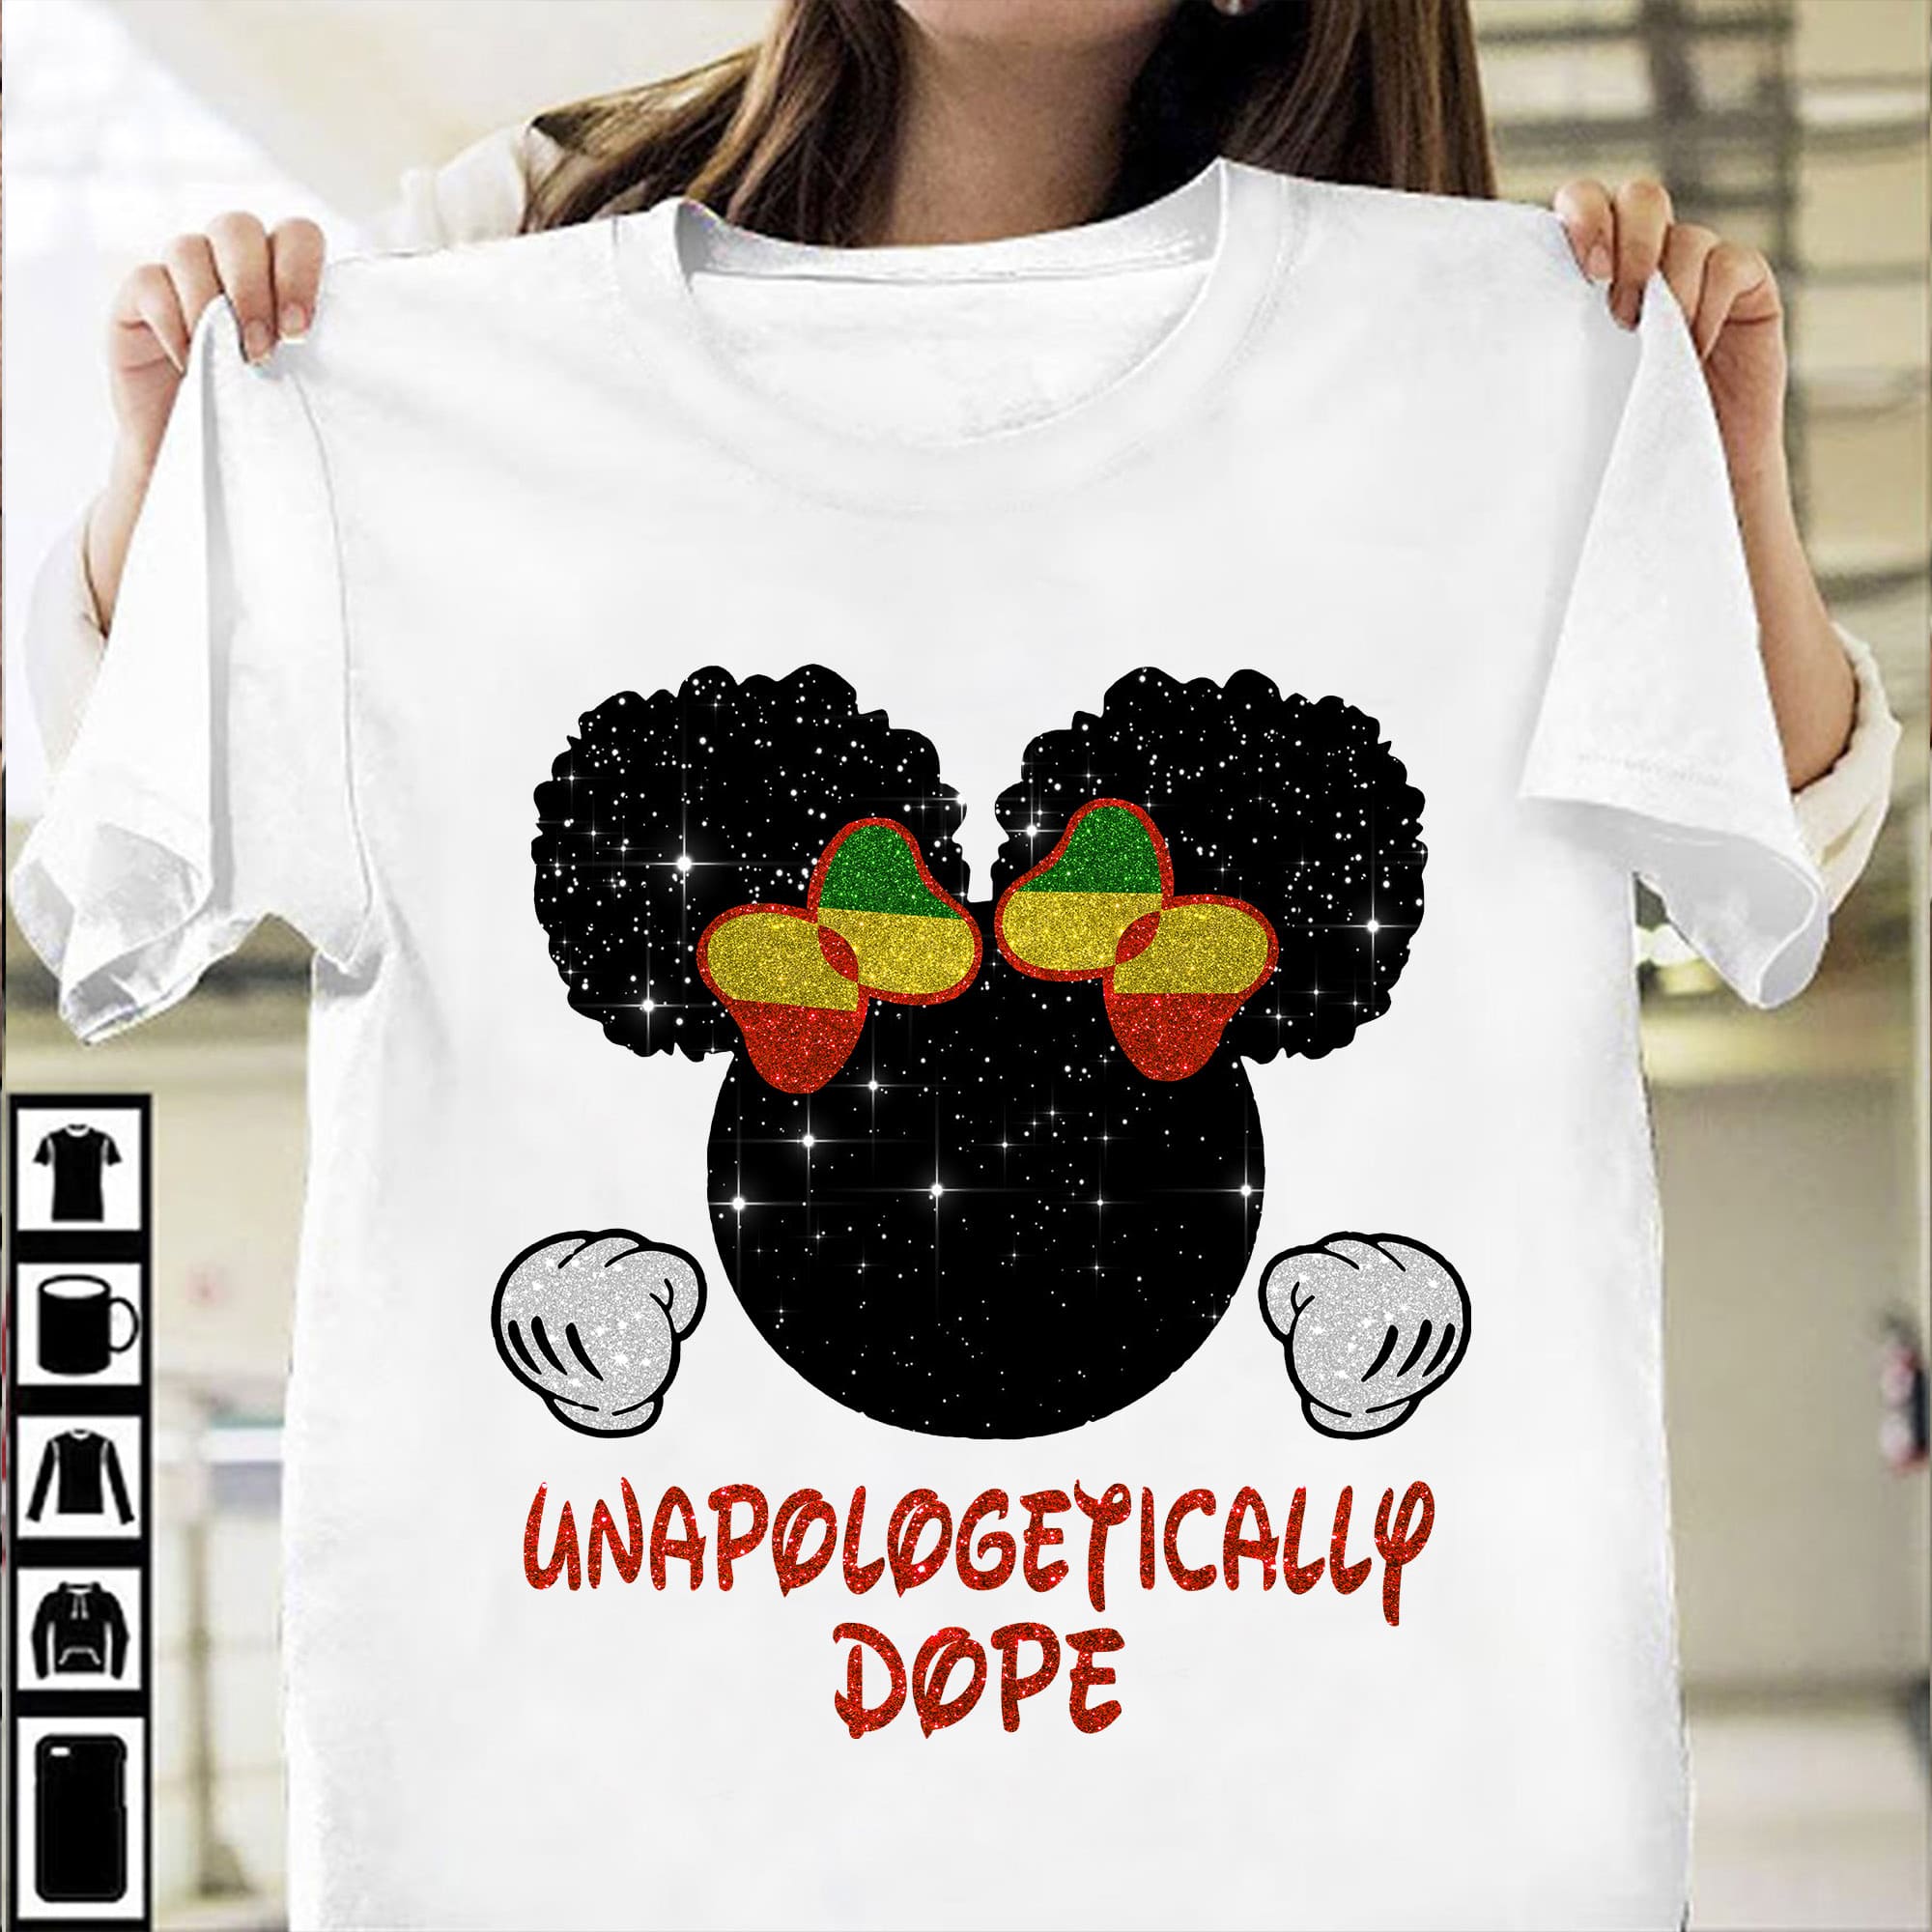 Unapologetically dope - Gift for black girl, Minnie mouse T-shirt